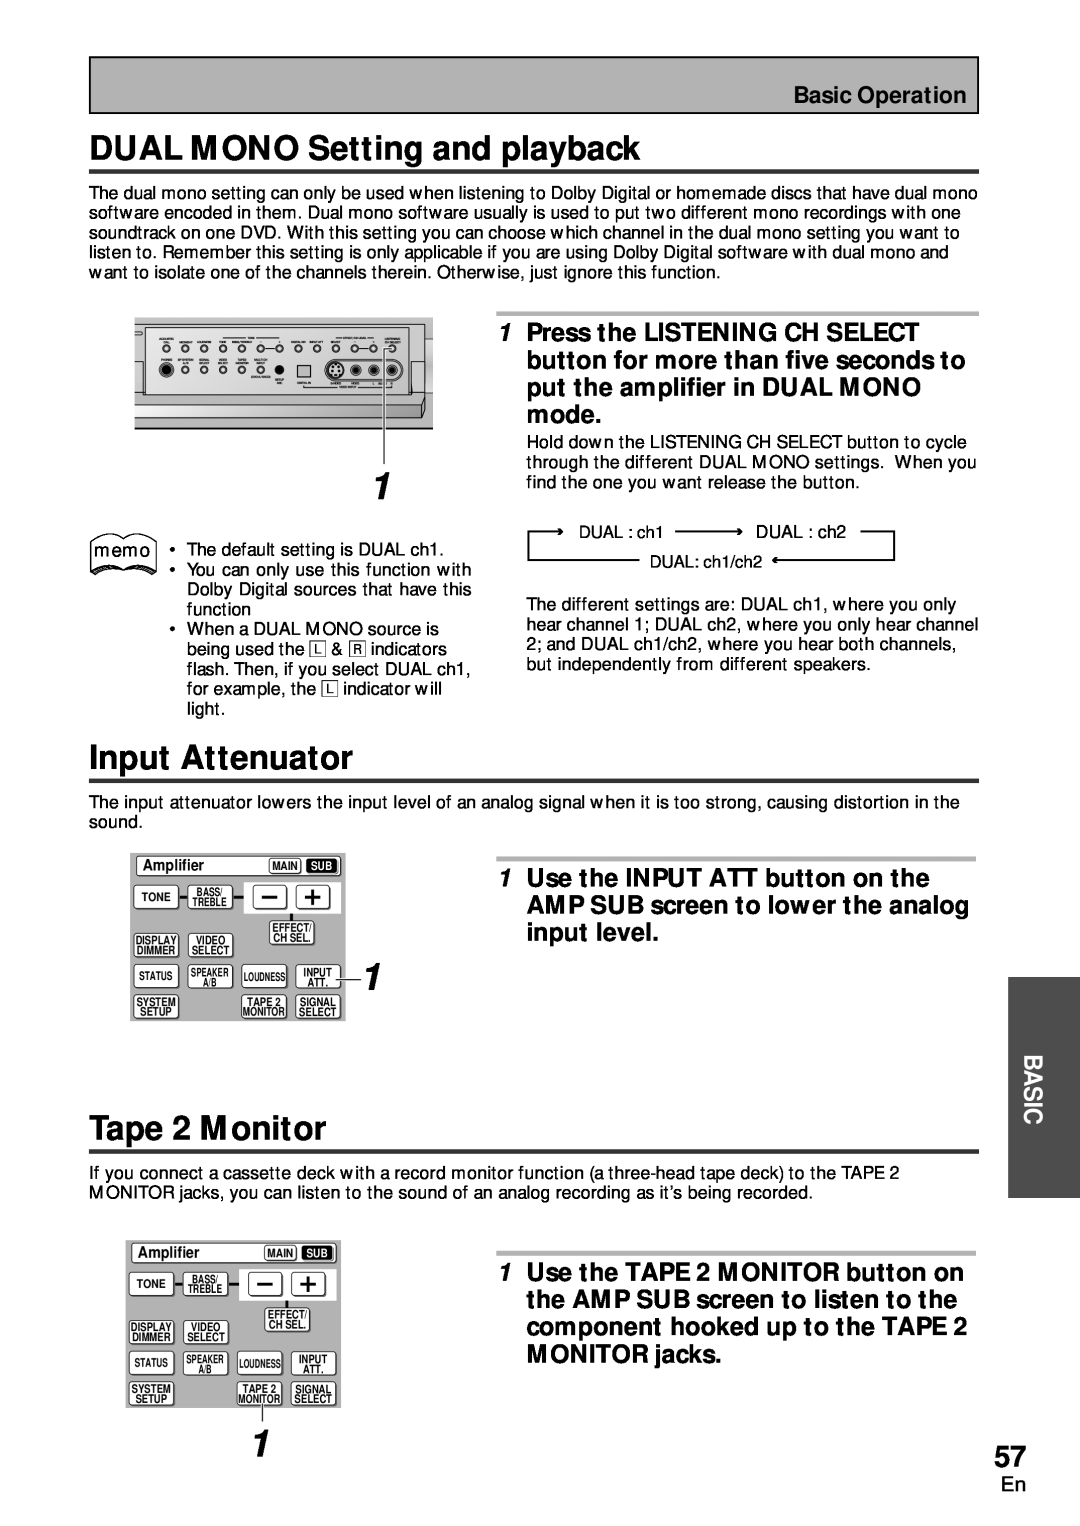 Pioneer VSA-AX10 operating instructions DUAL MONO Setting and playback, Input Attenuator, Tape 2 Monitor, mode 